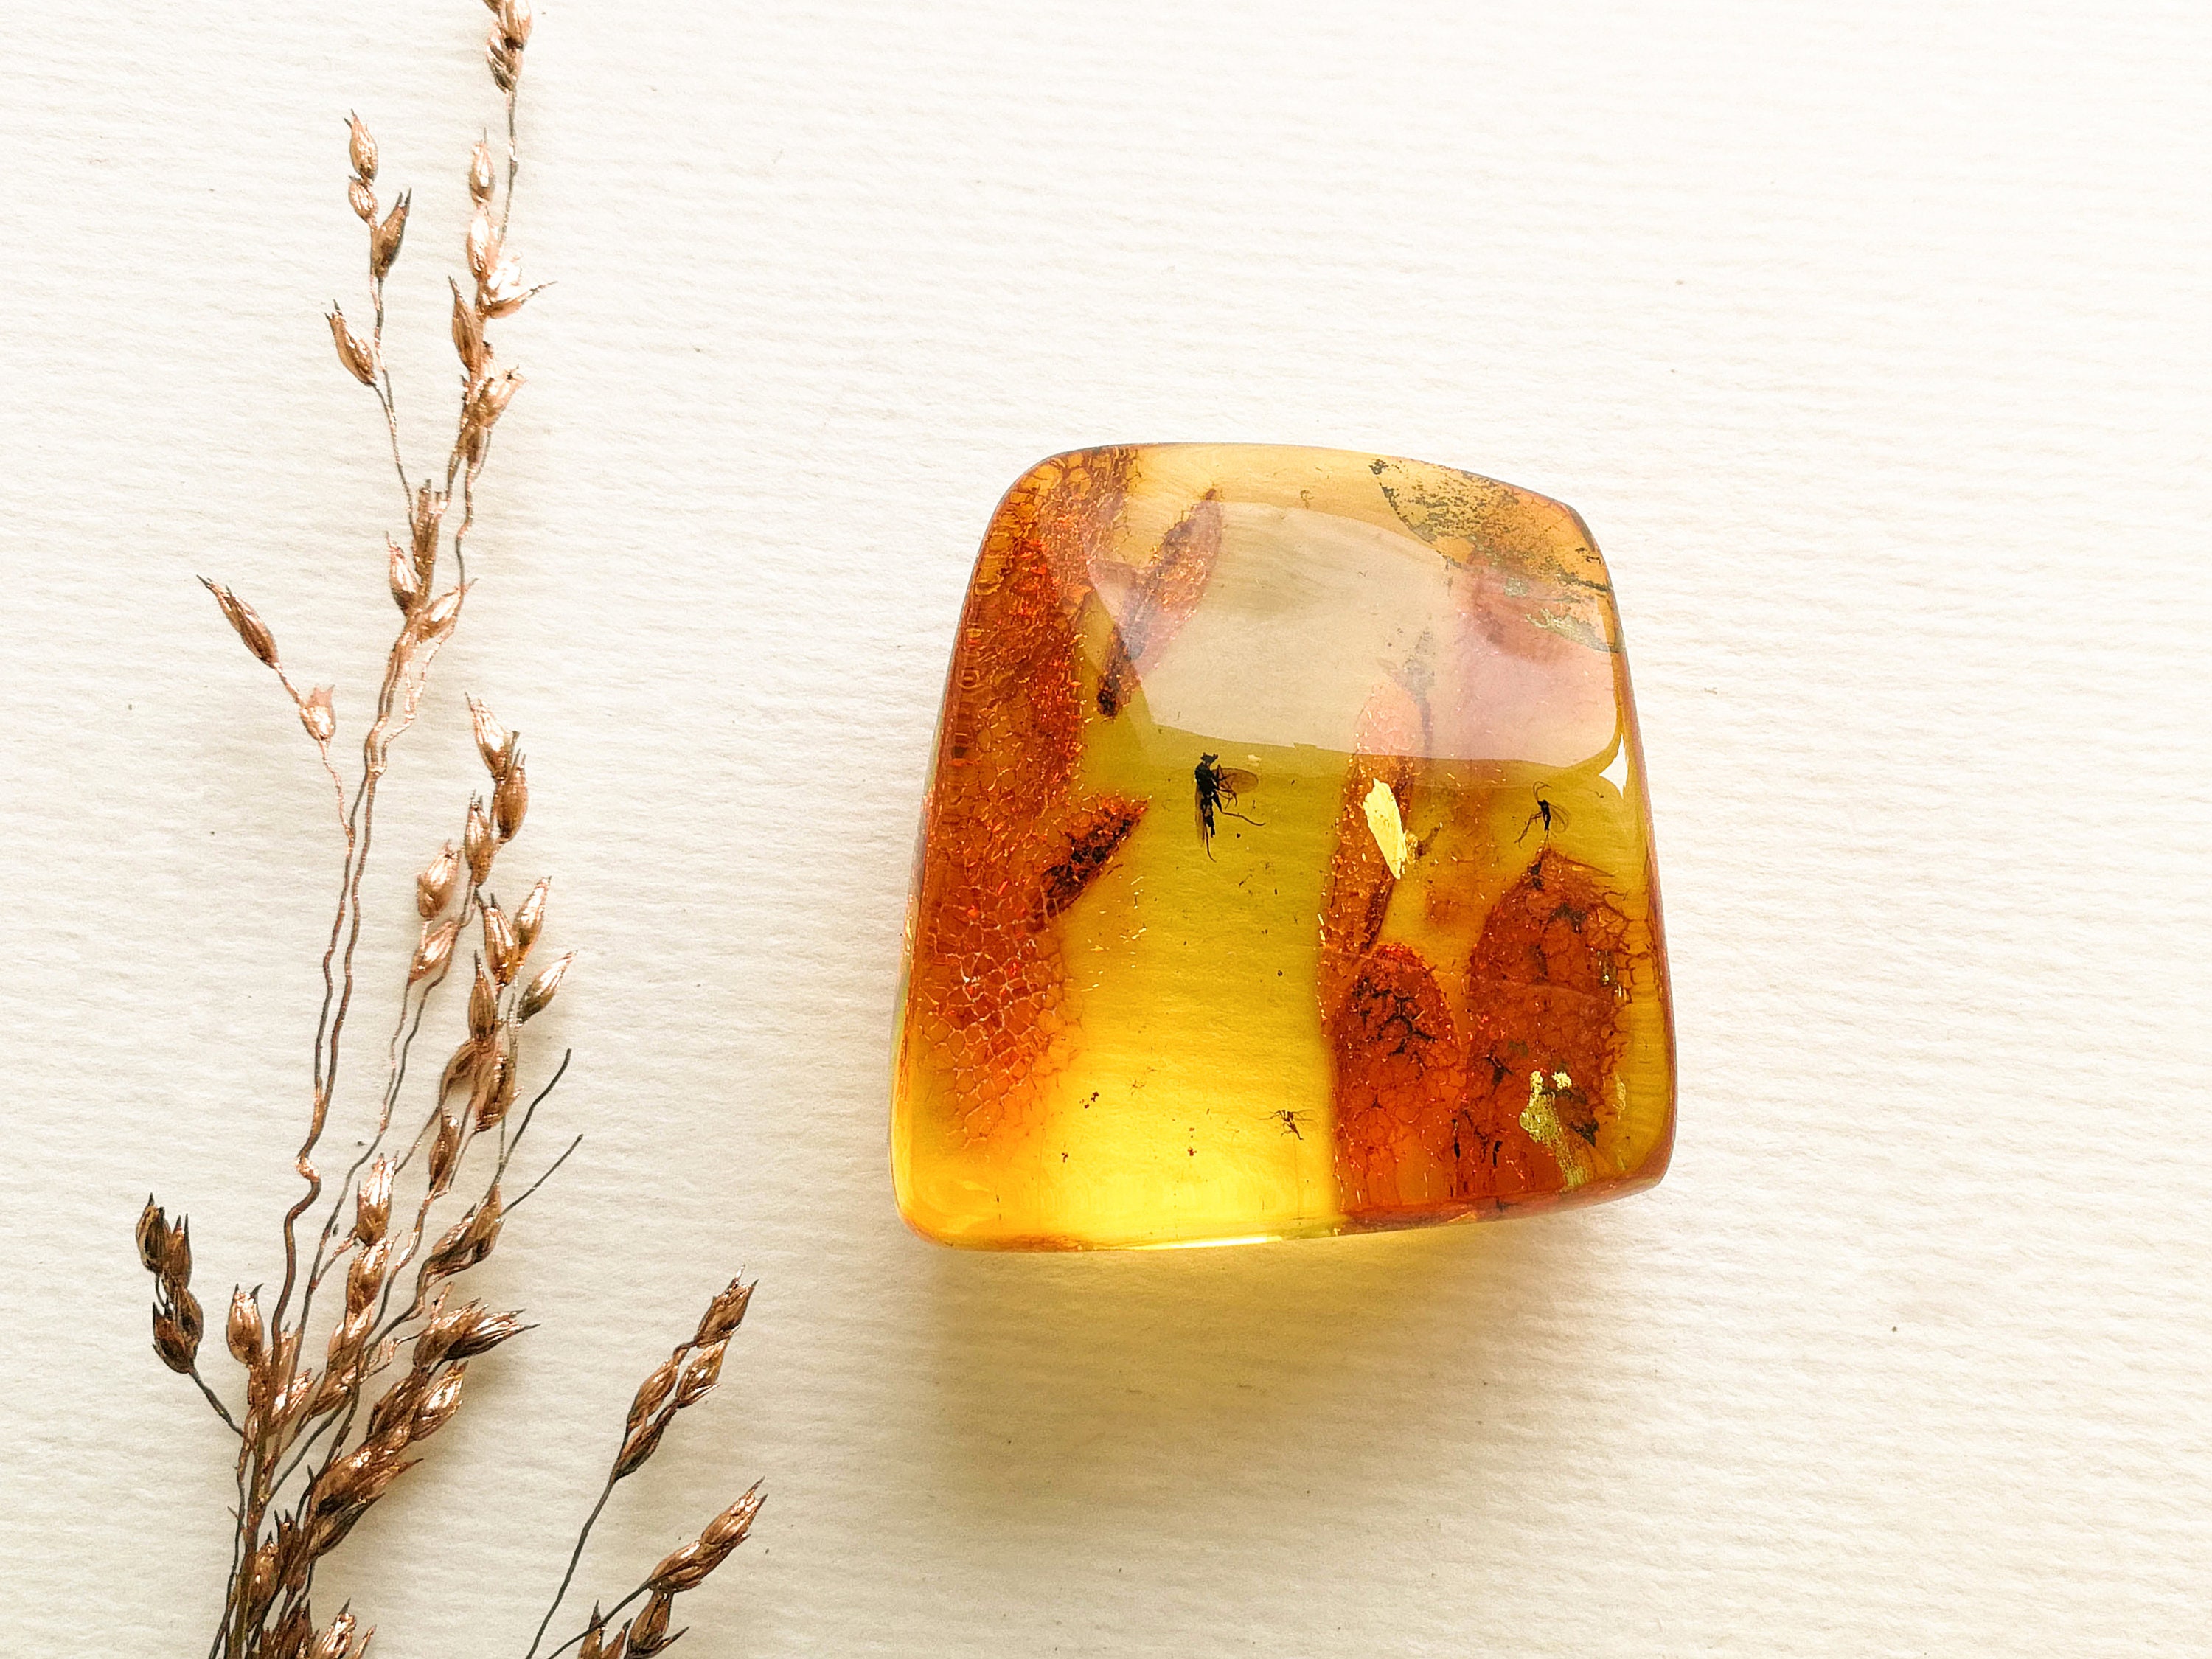 4Pcs Insect Specimen Amber Resin Insects Amber Resin Crafts Decorative Bug  Amber (Random Style)